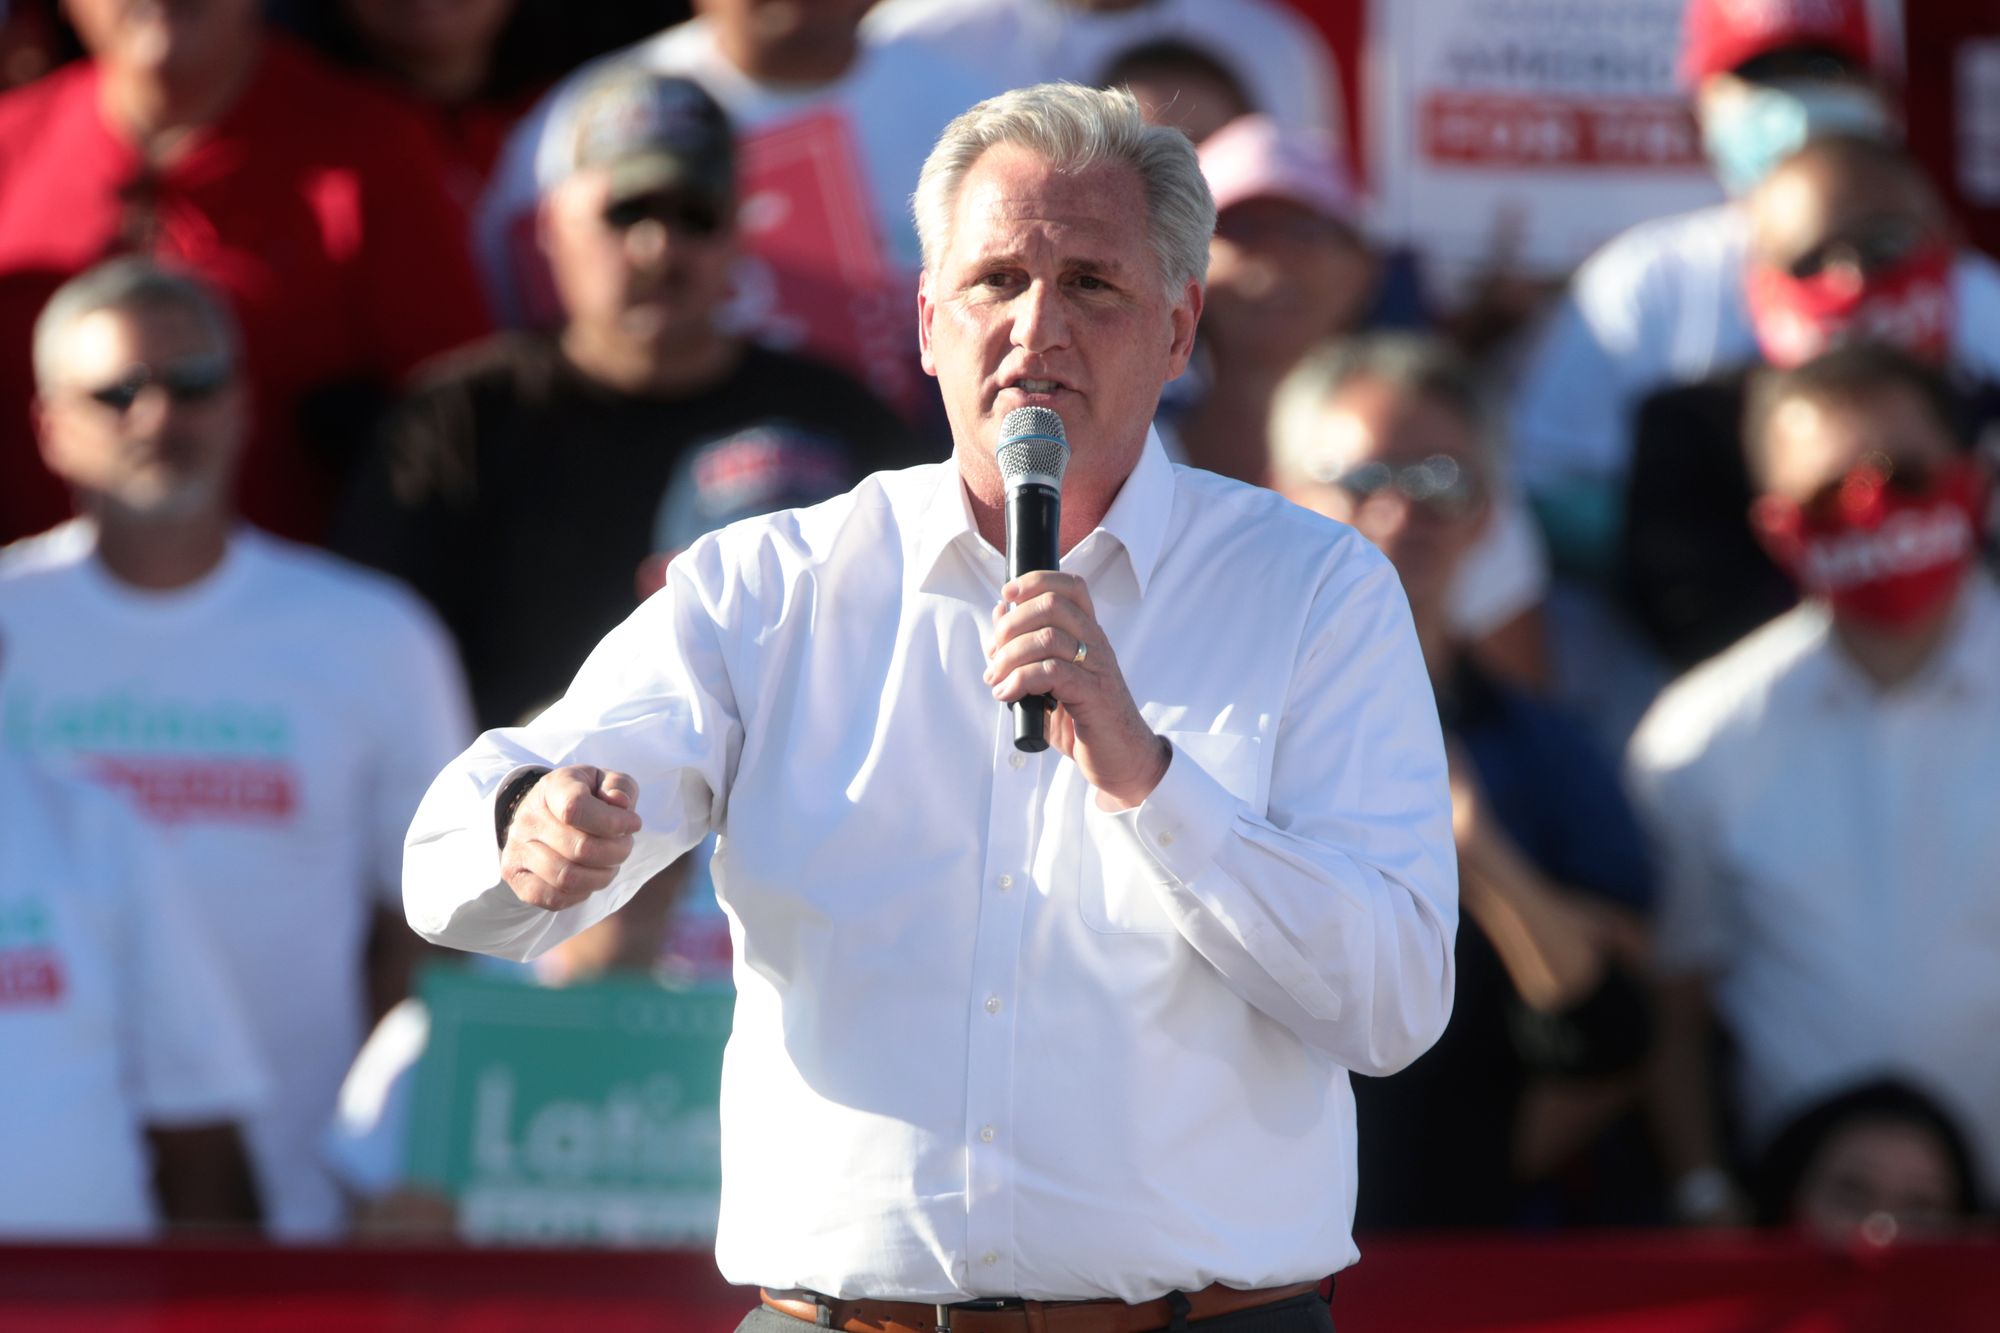 Rep. Kevin McCarthy speaking at a Donald Trump rally in 2020. Photo: Gage Skidmore